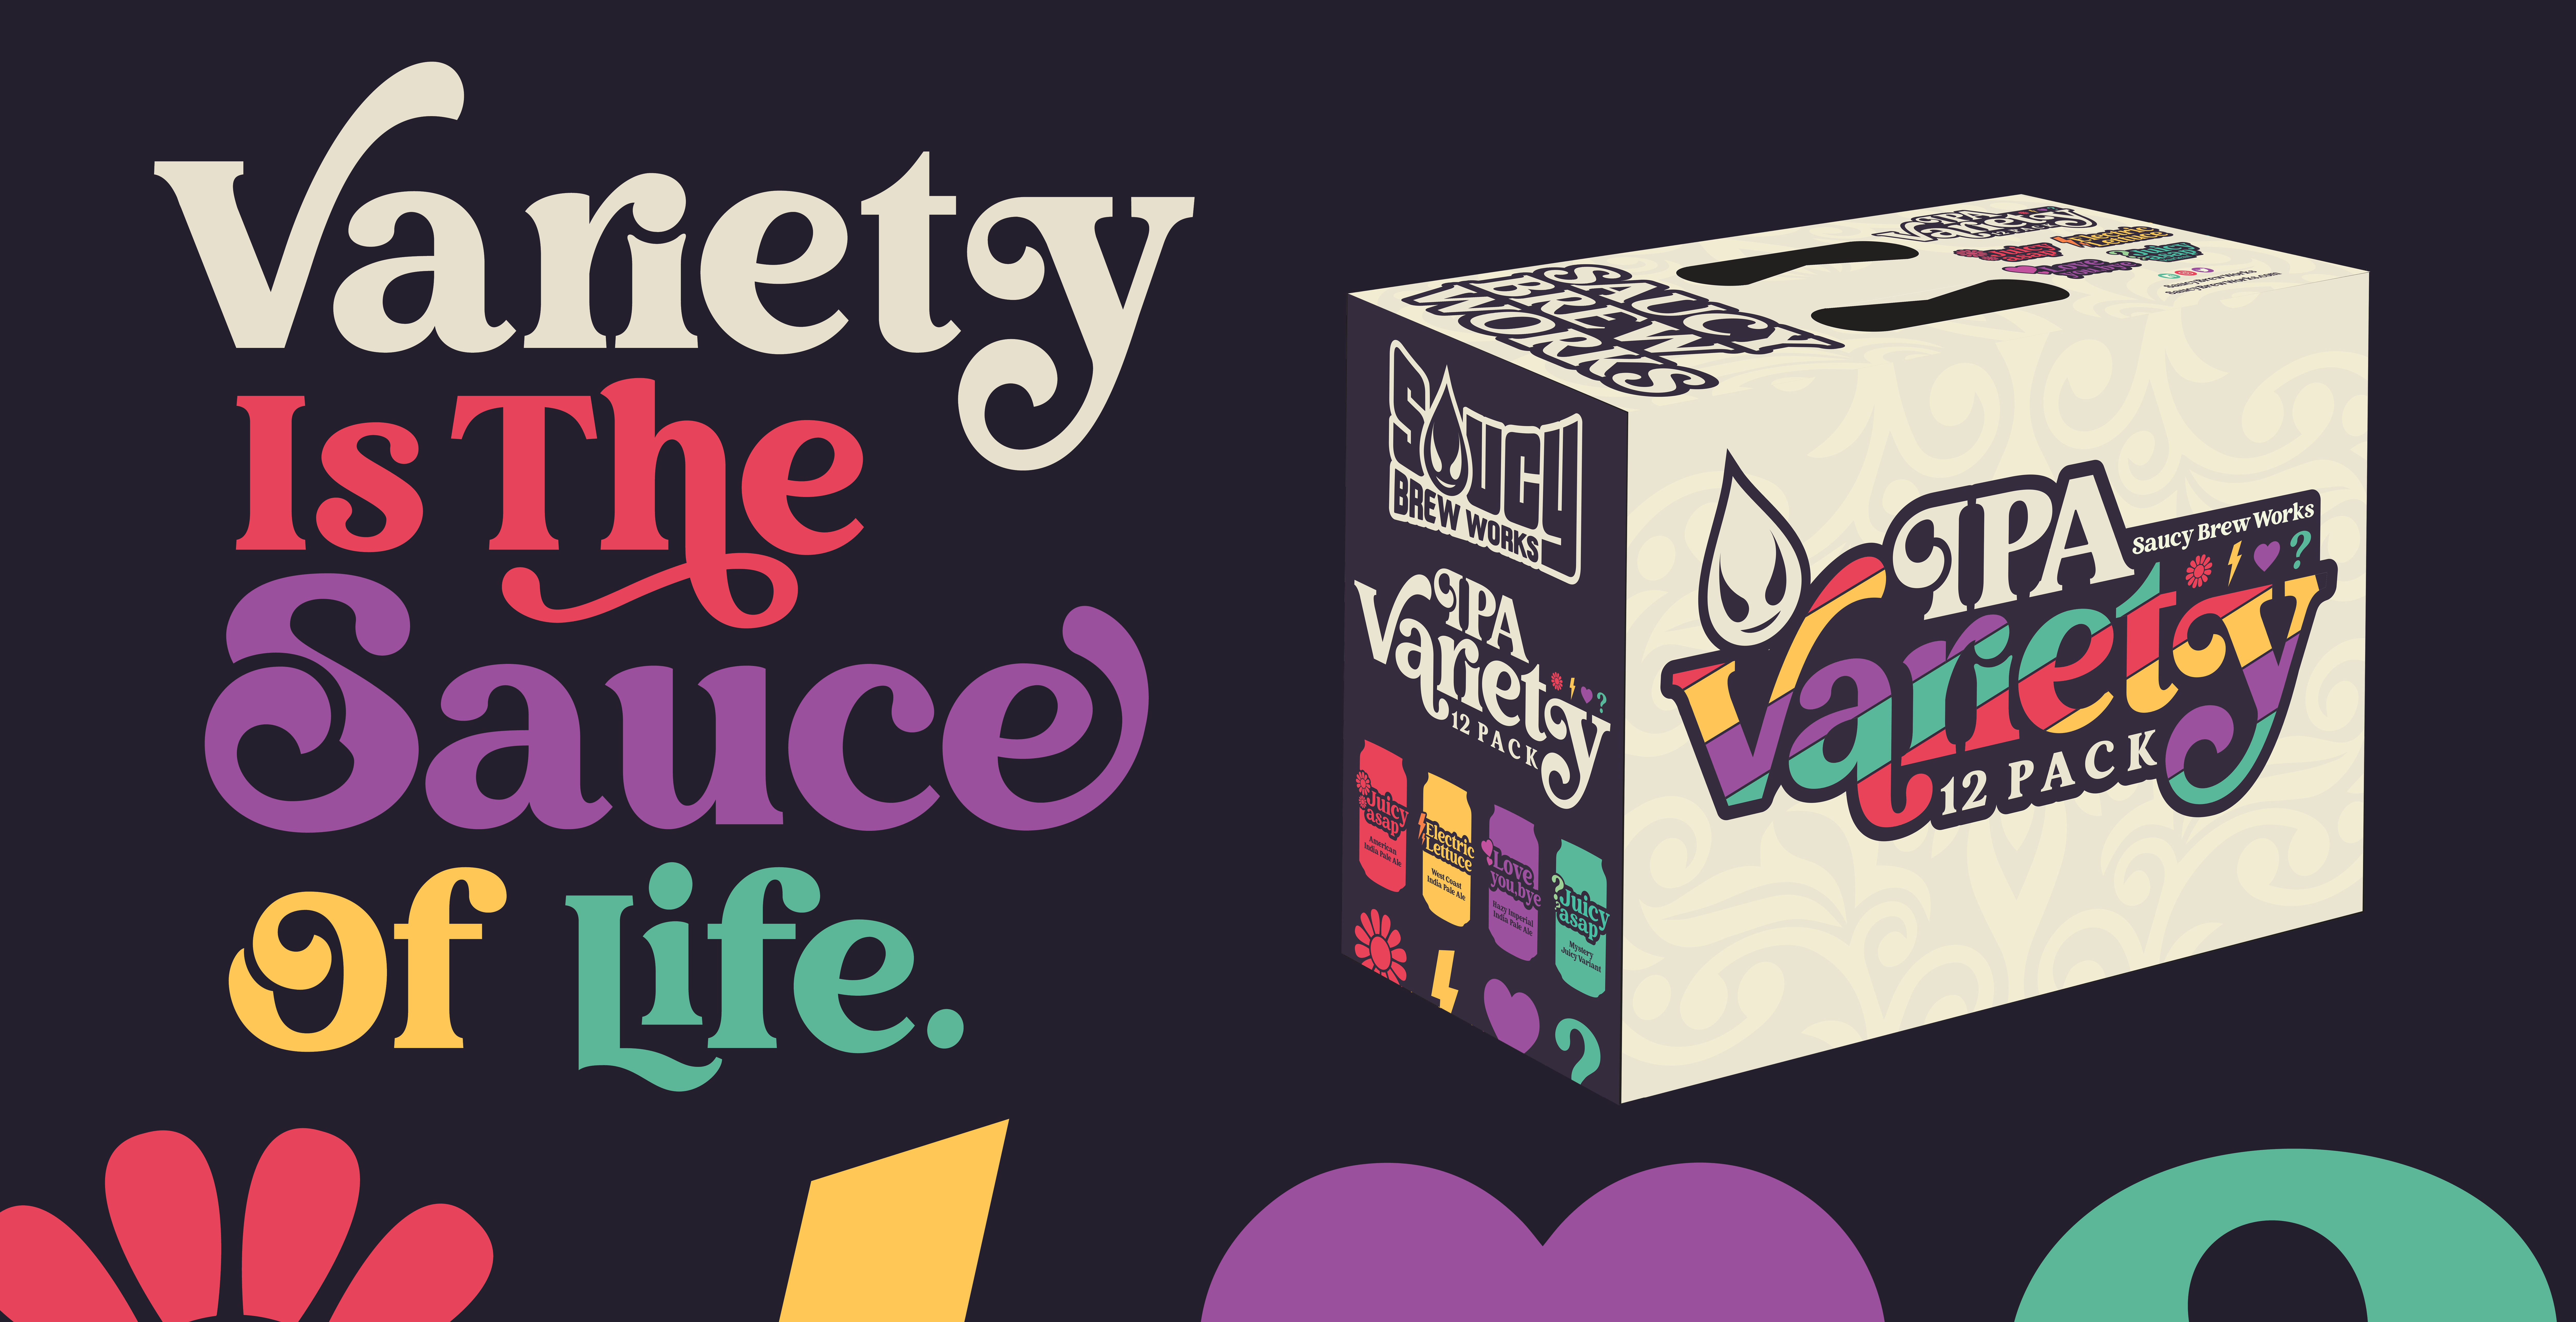 Variety is the Sauce of Life IPA variety 12 pack